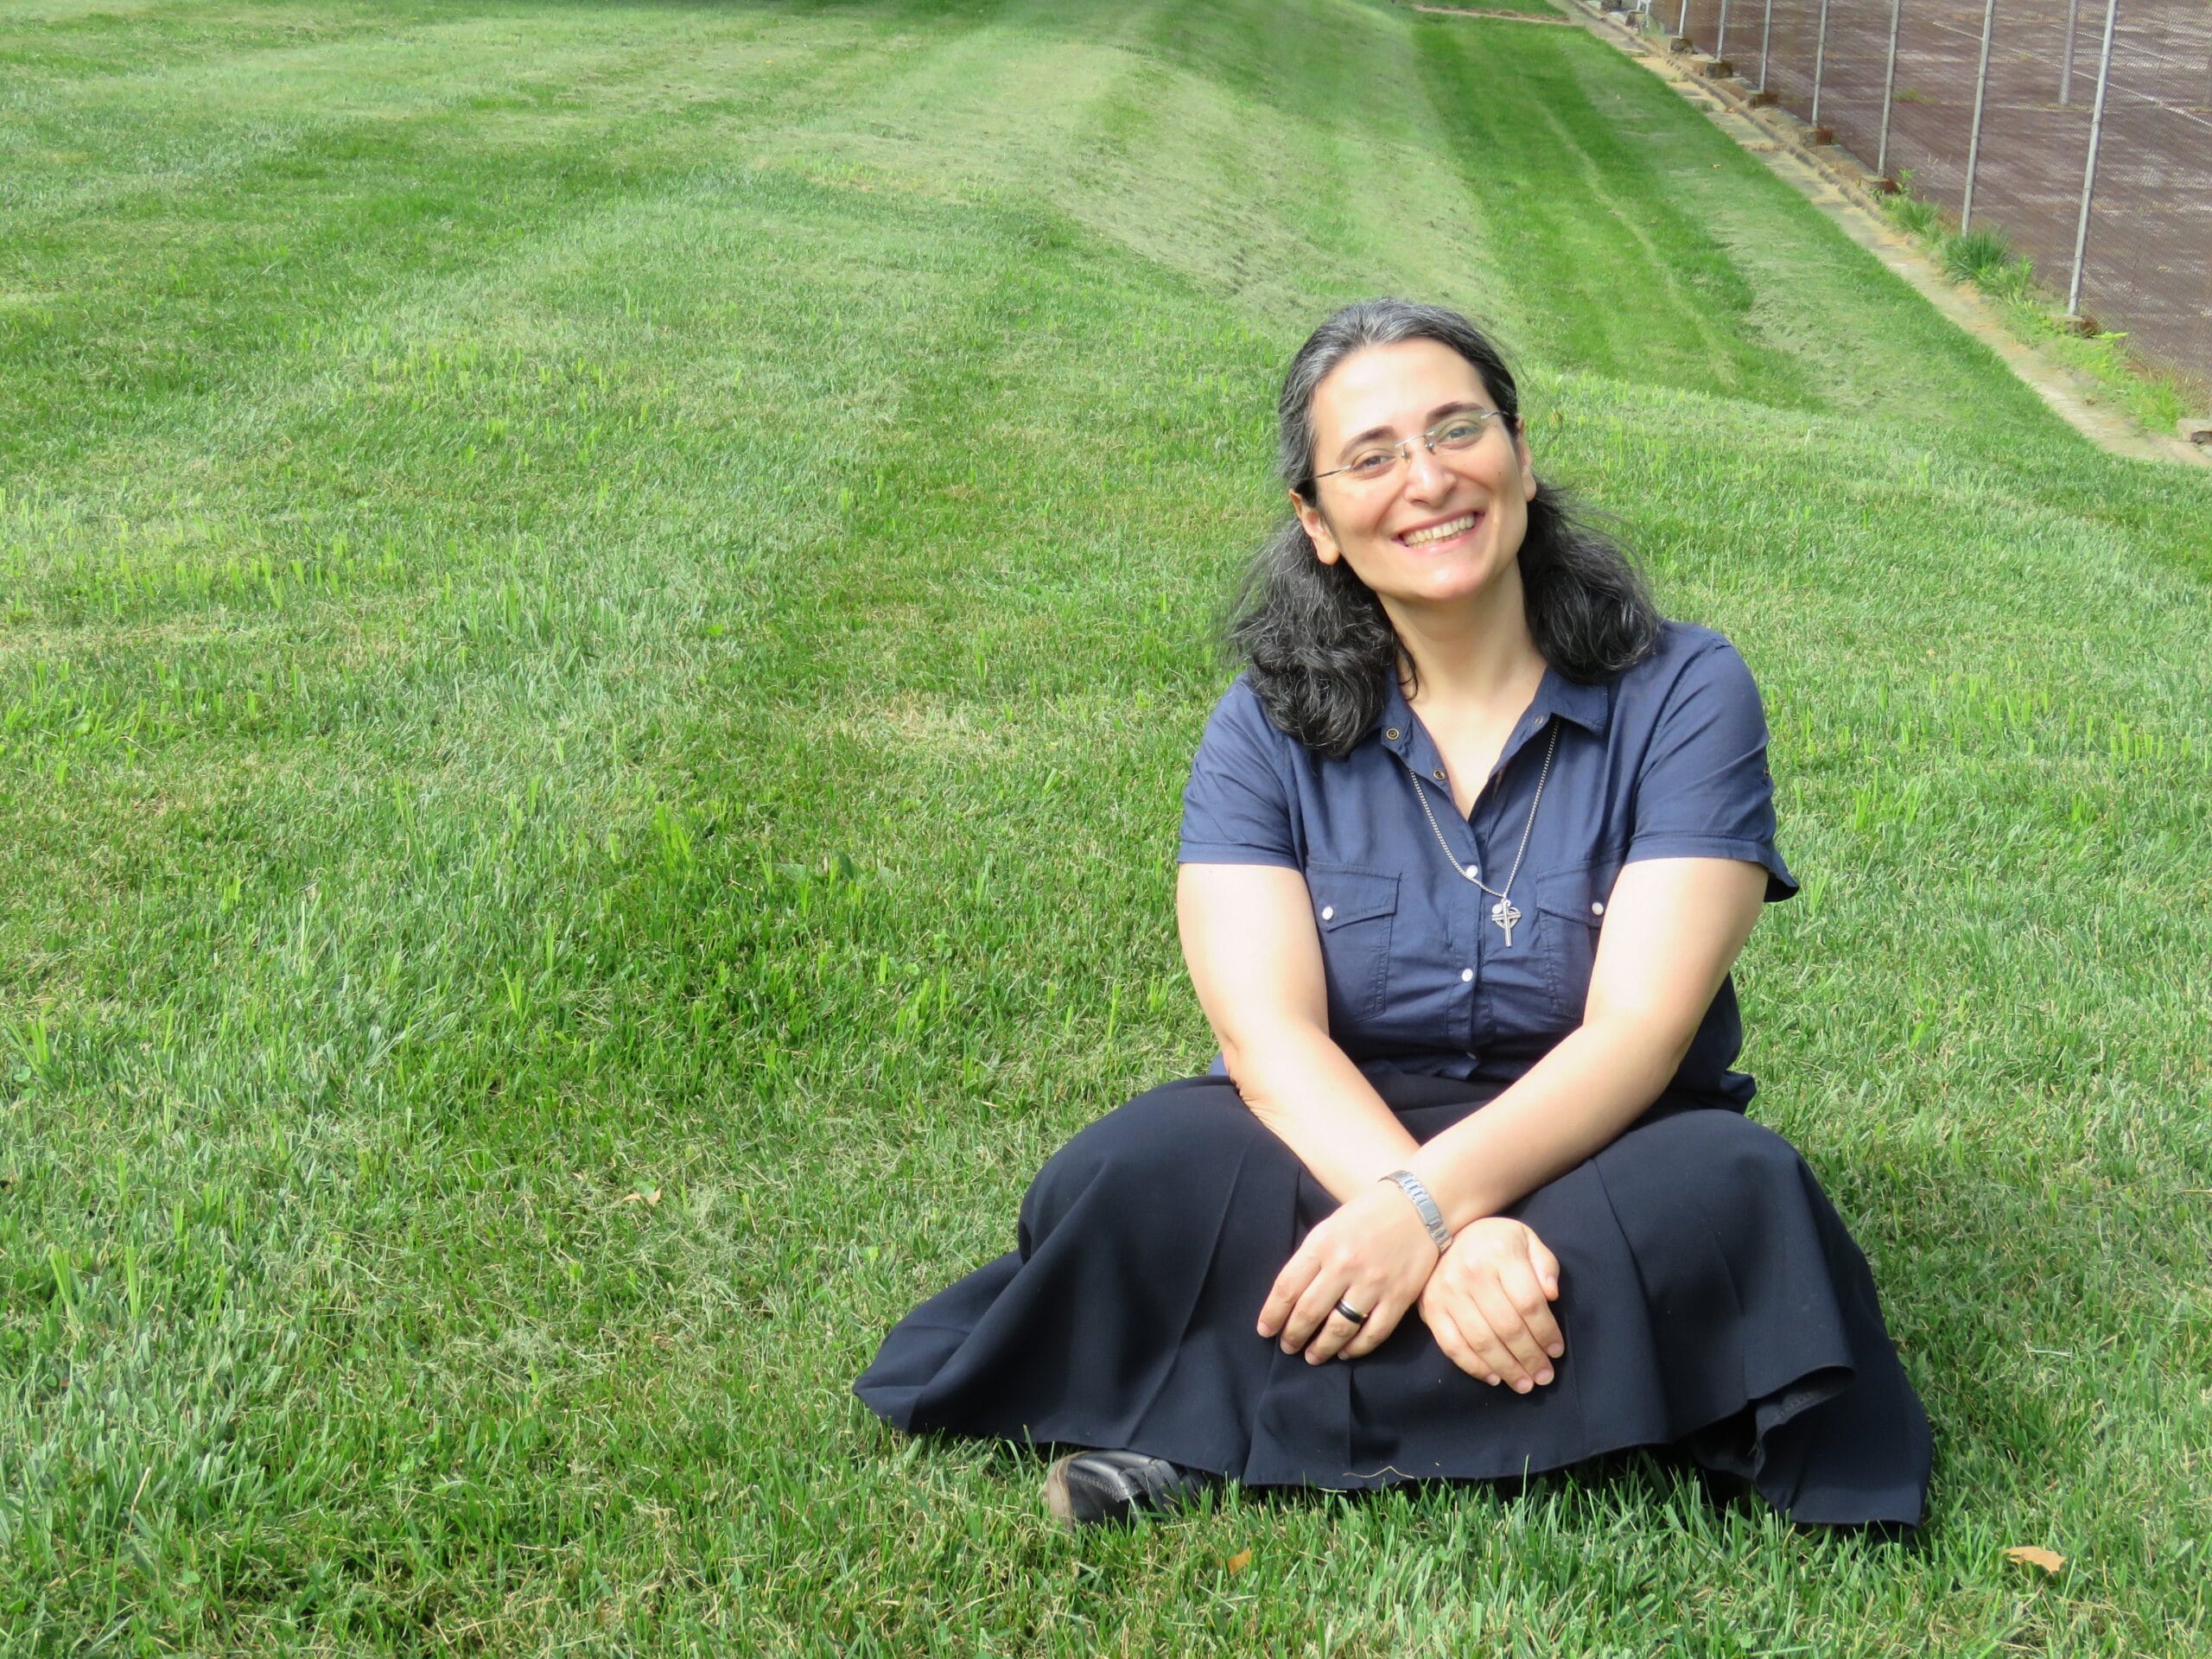 Monique Tarabeh on being and becoming a nun